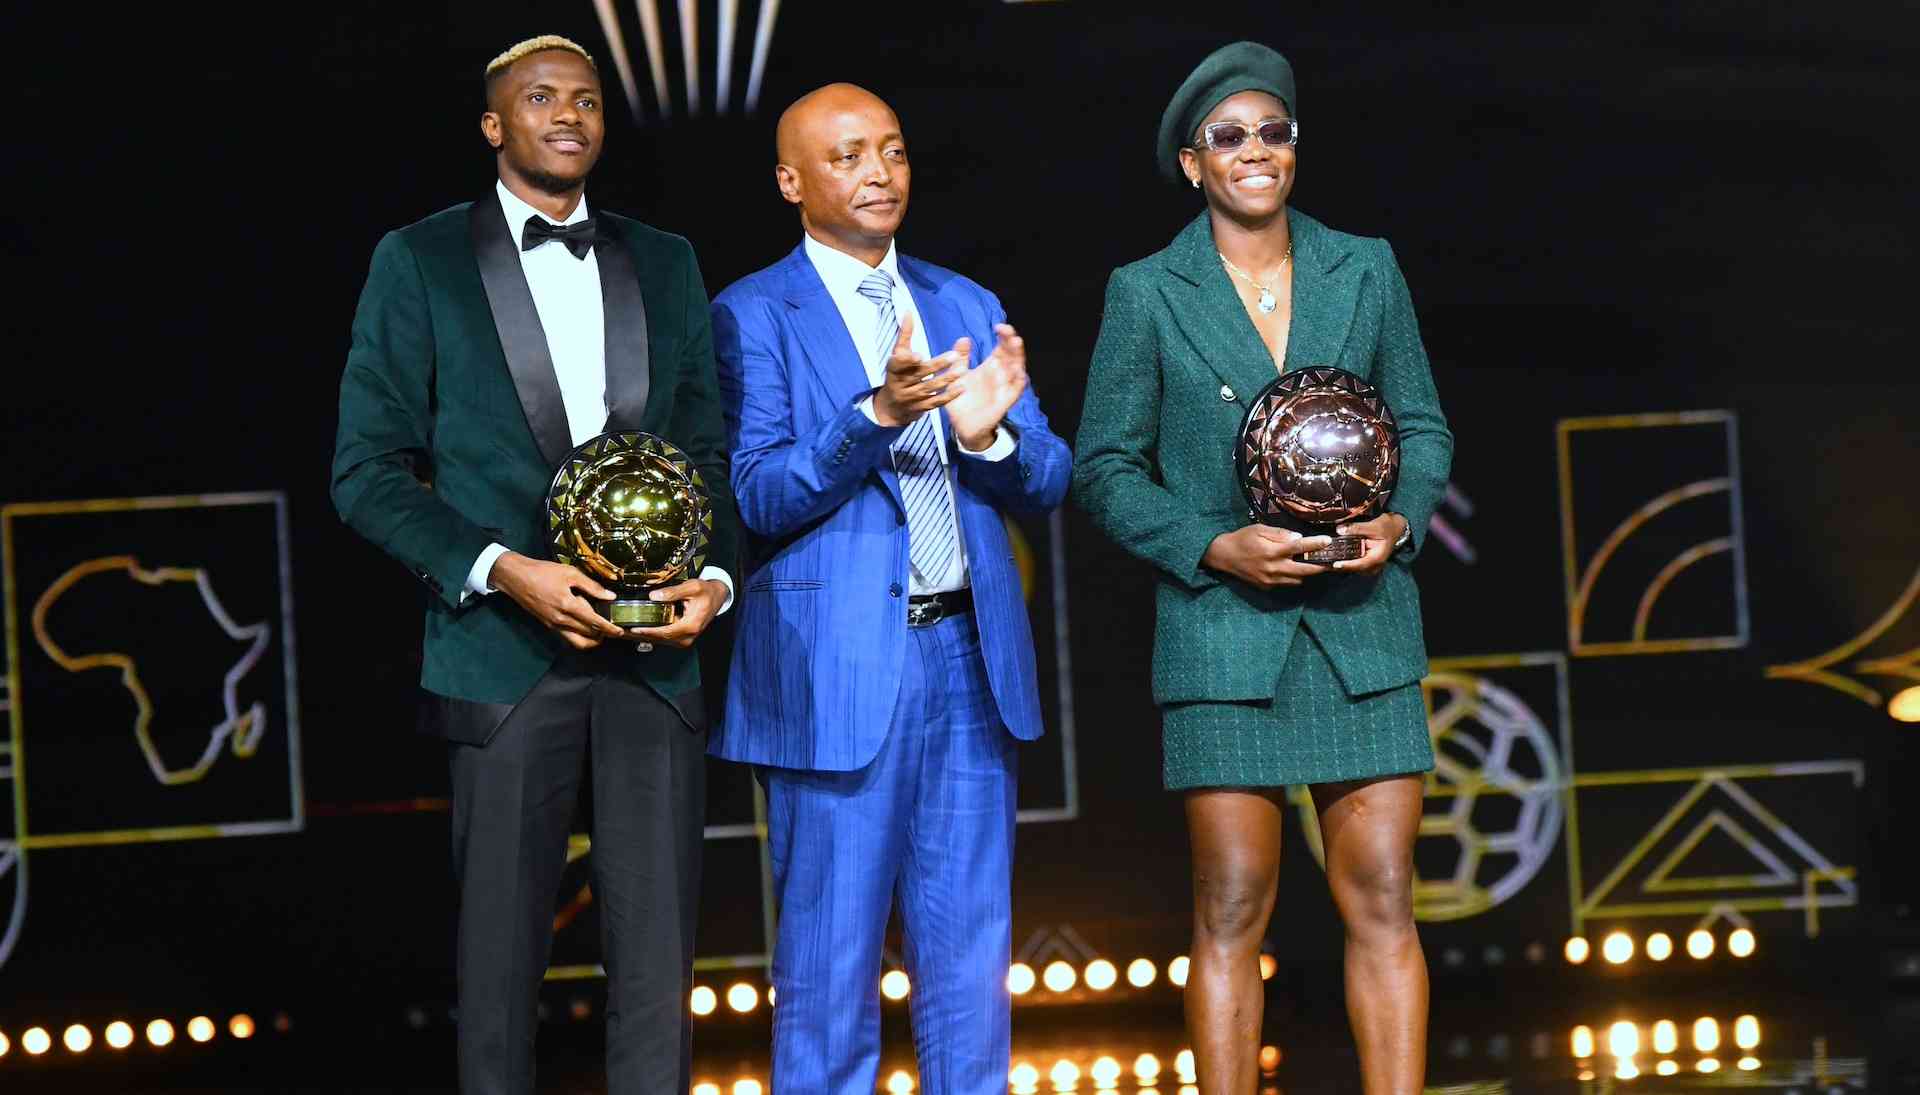 Nigerian duo Osimhen and Oshoala named African player of the year